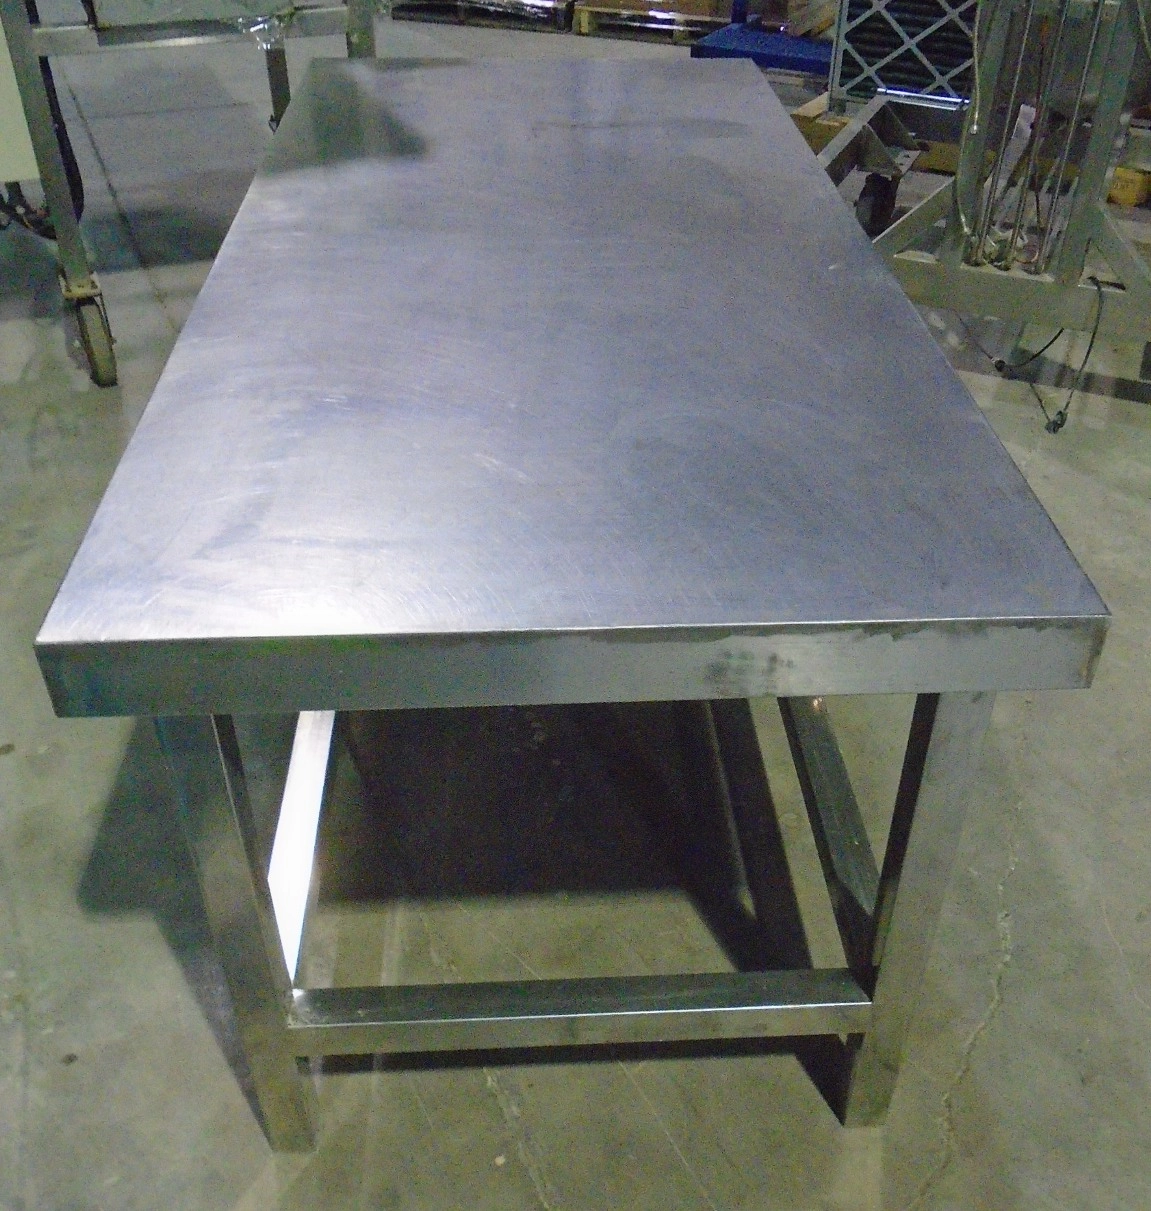 Used 72 inch Long x 32 inch Wide Stainless Steel Packing Table